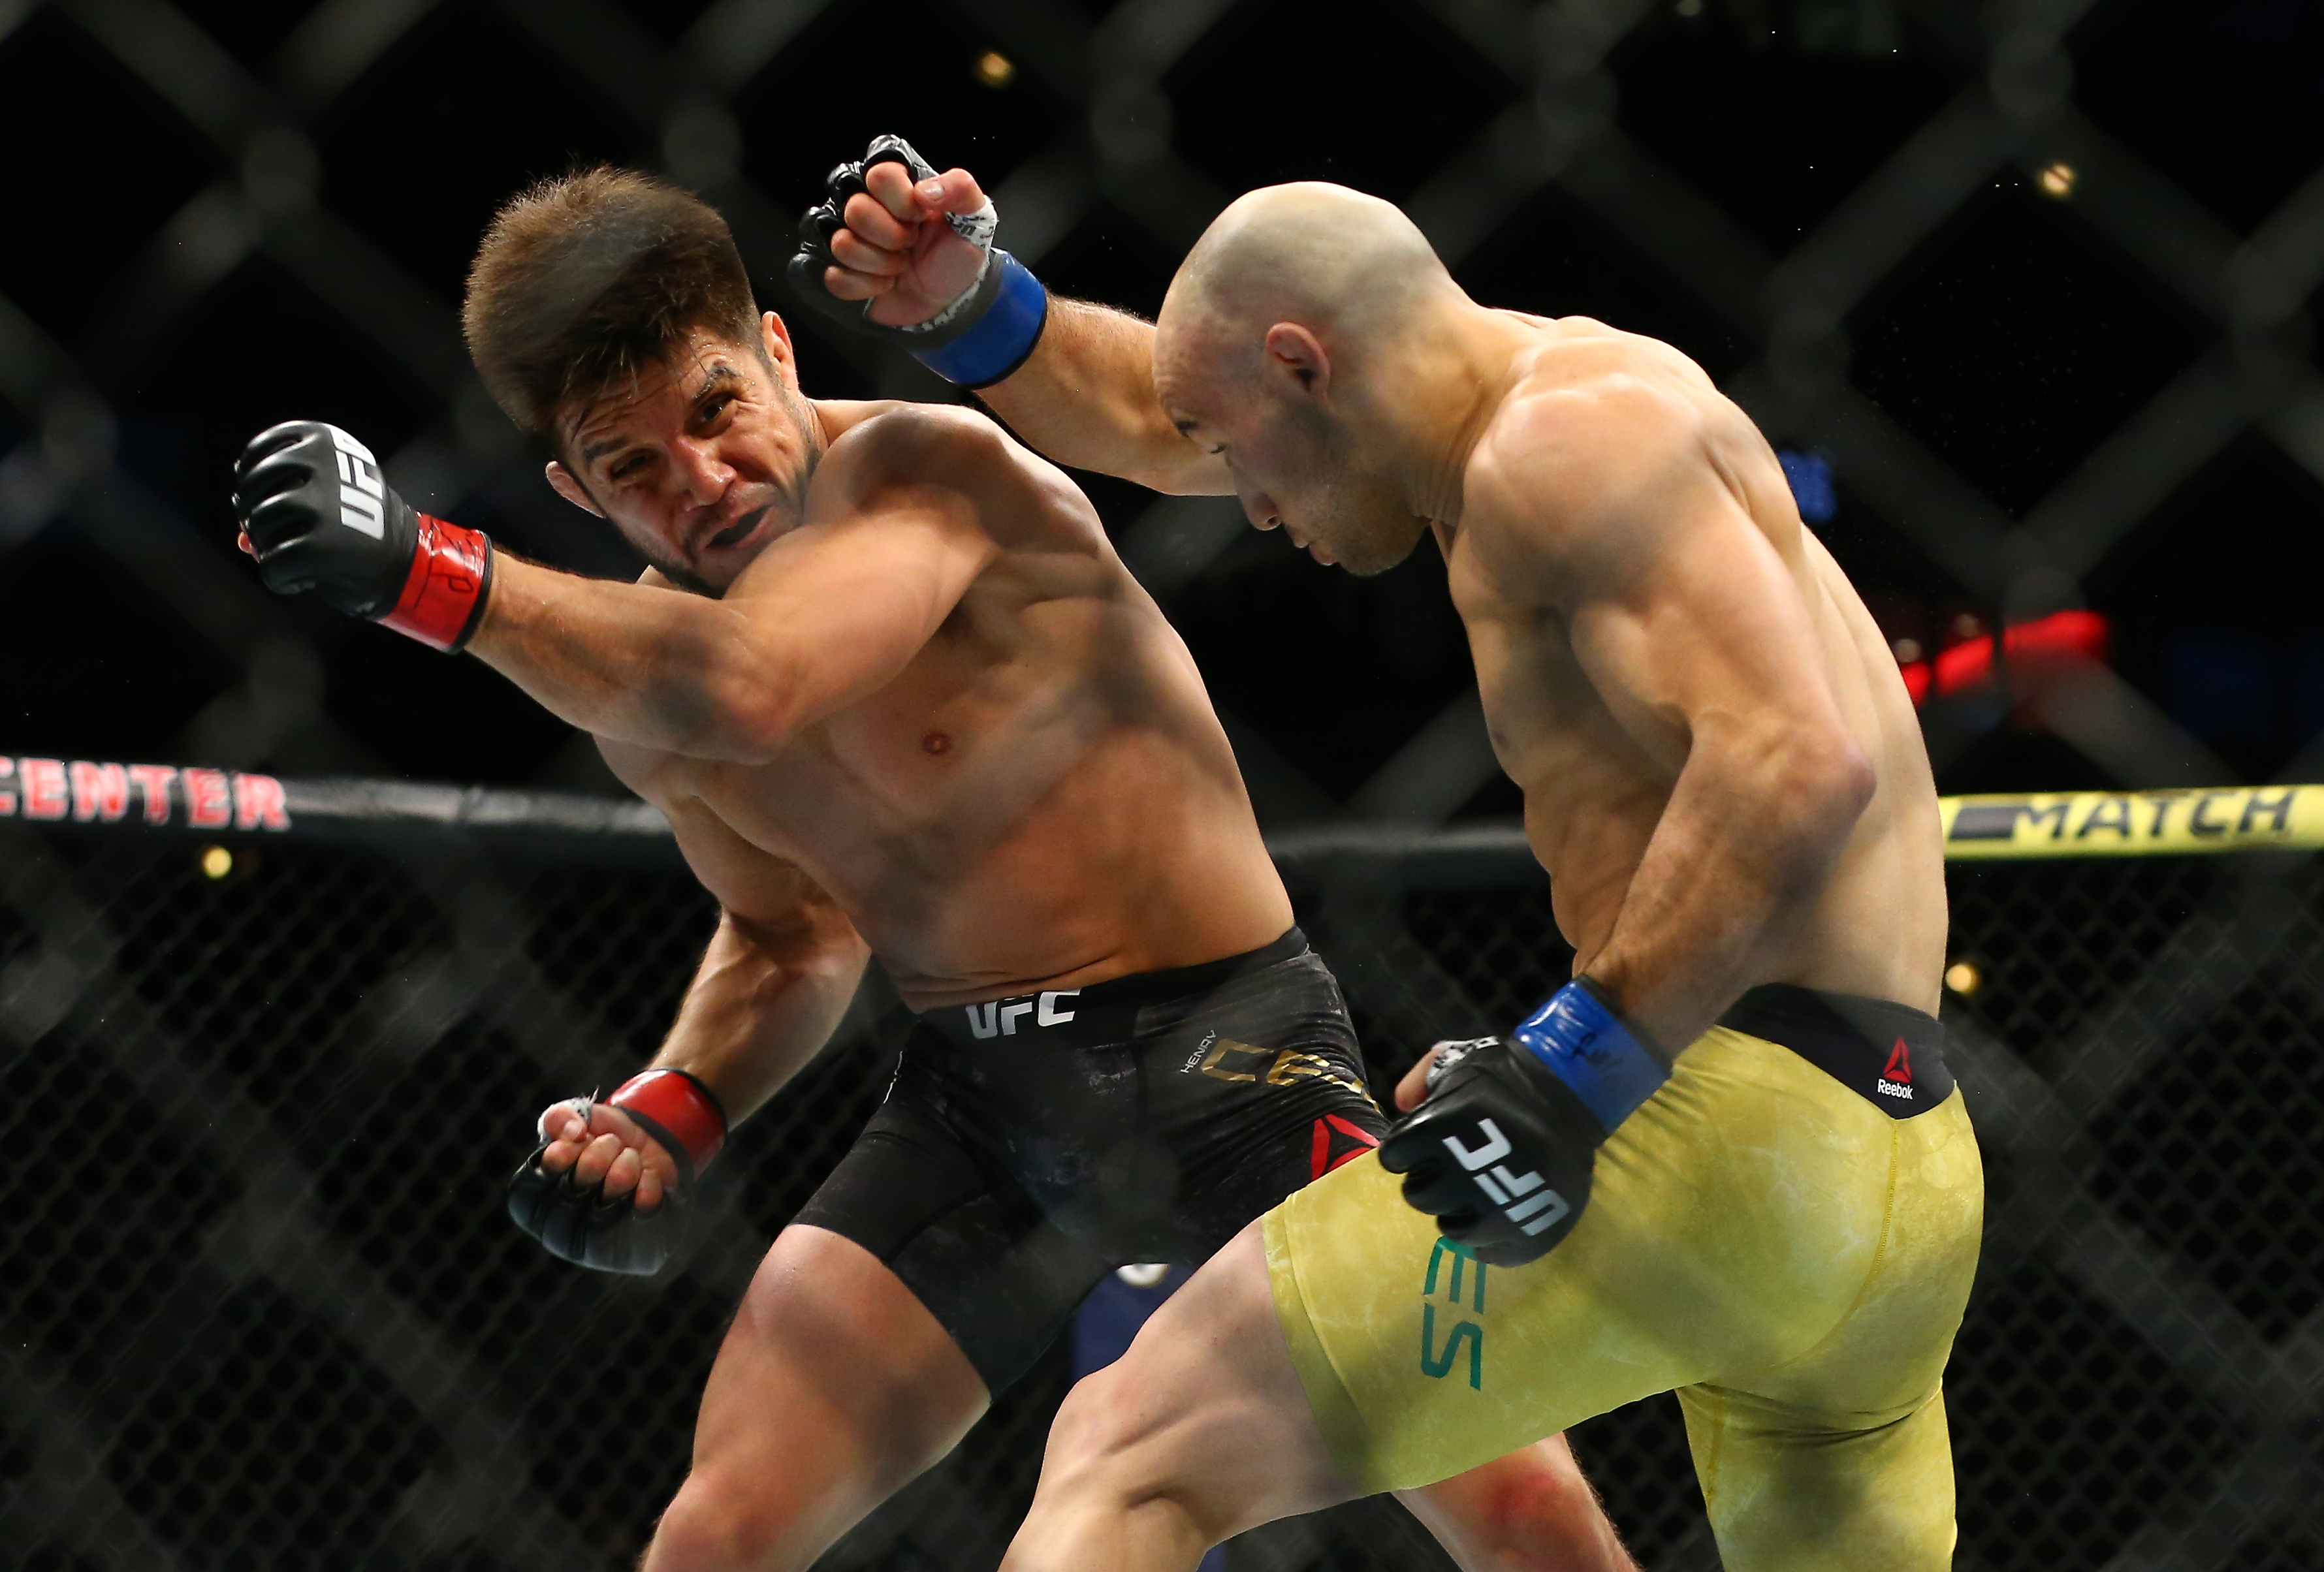 Henry Cejudo Wipes The Floor Of Marlon Moraes At UFC 238: “I’m The Greatest All-Time”